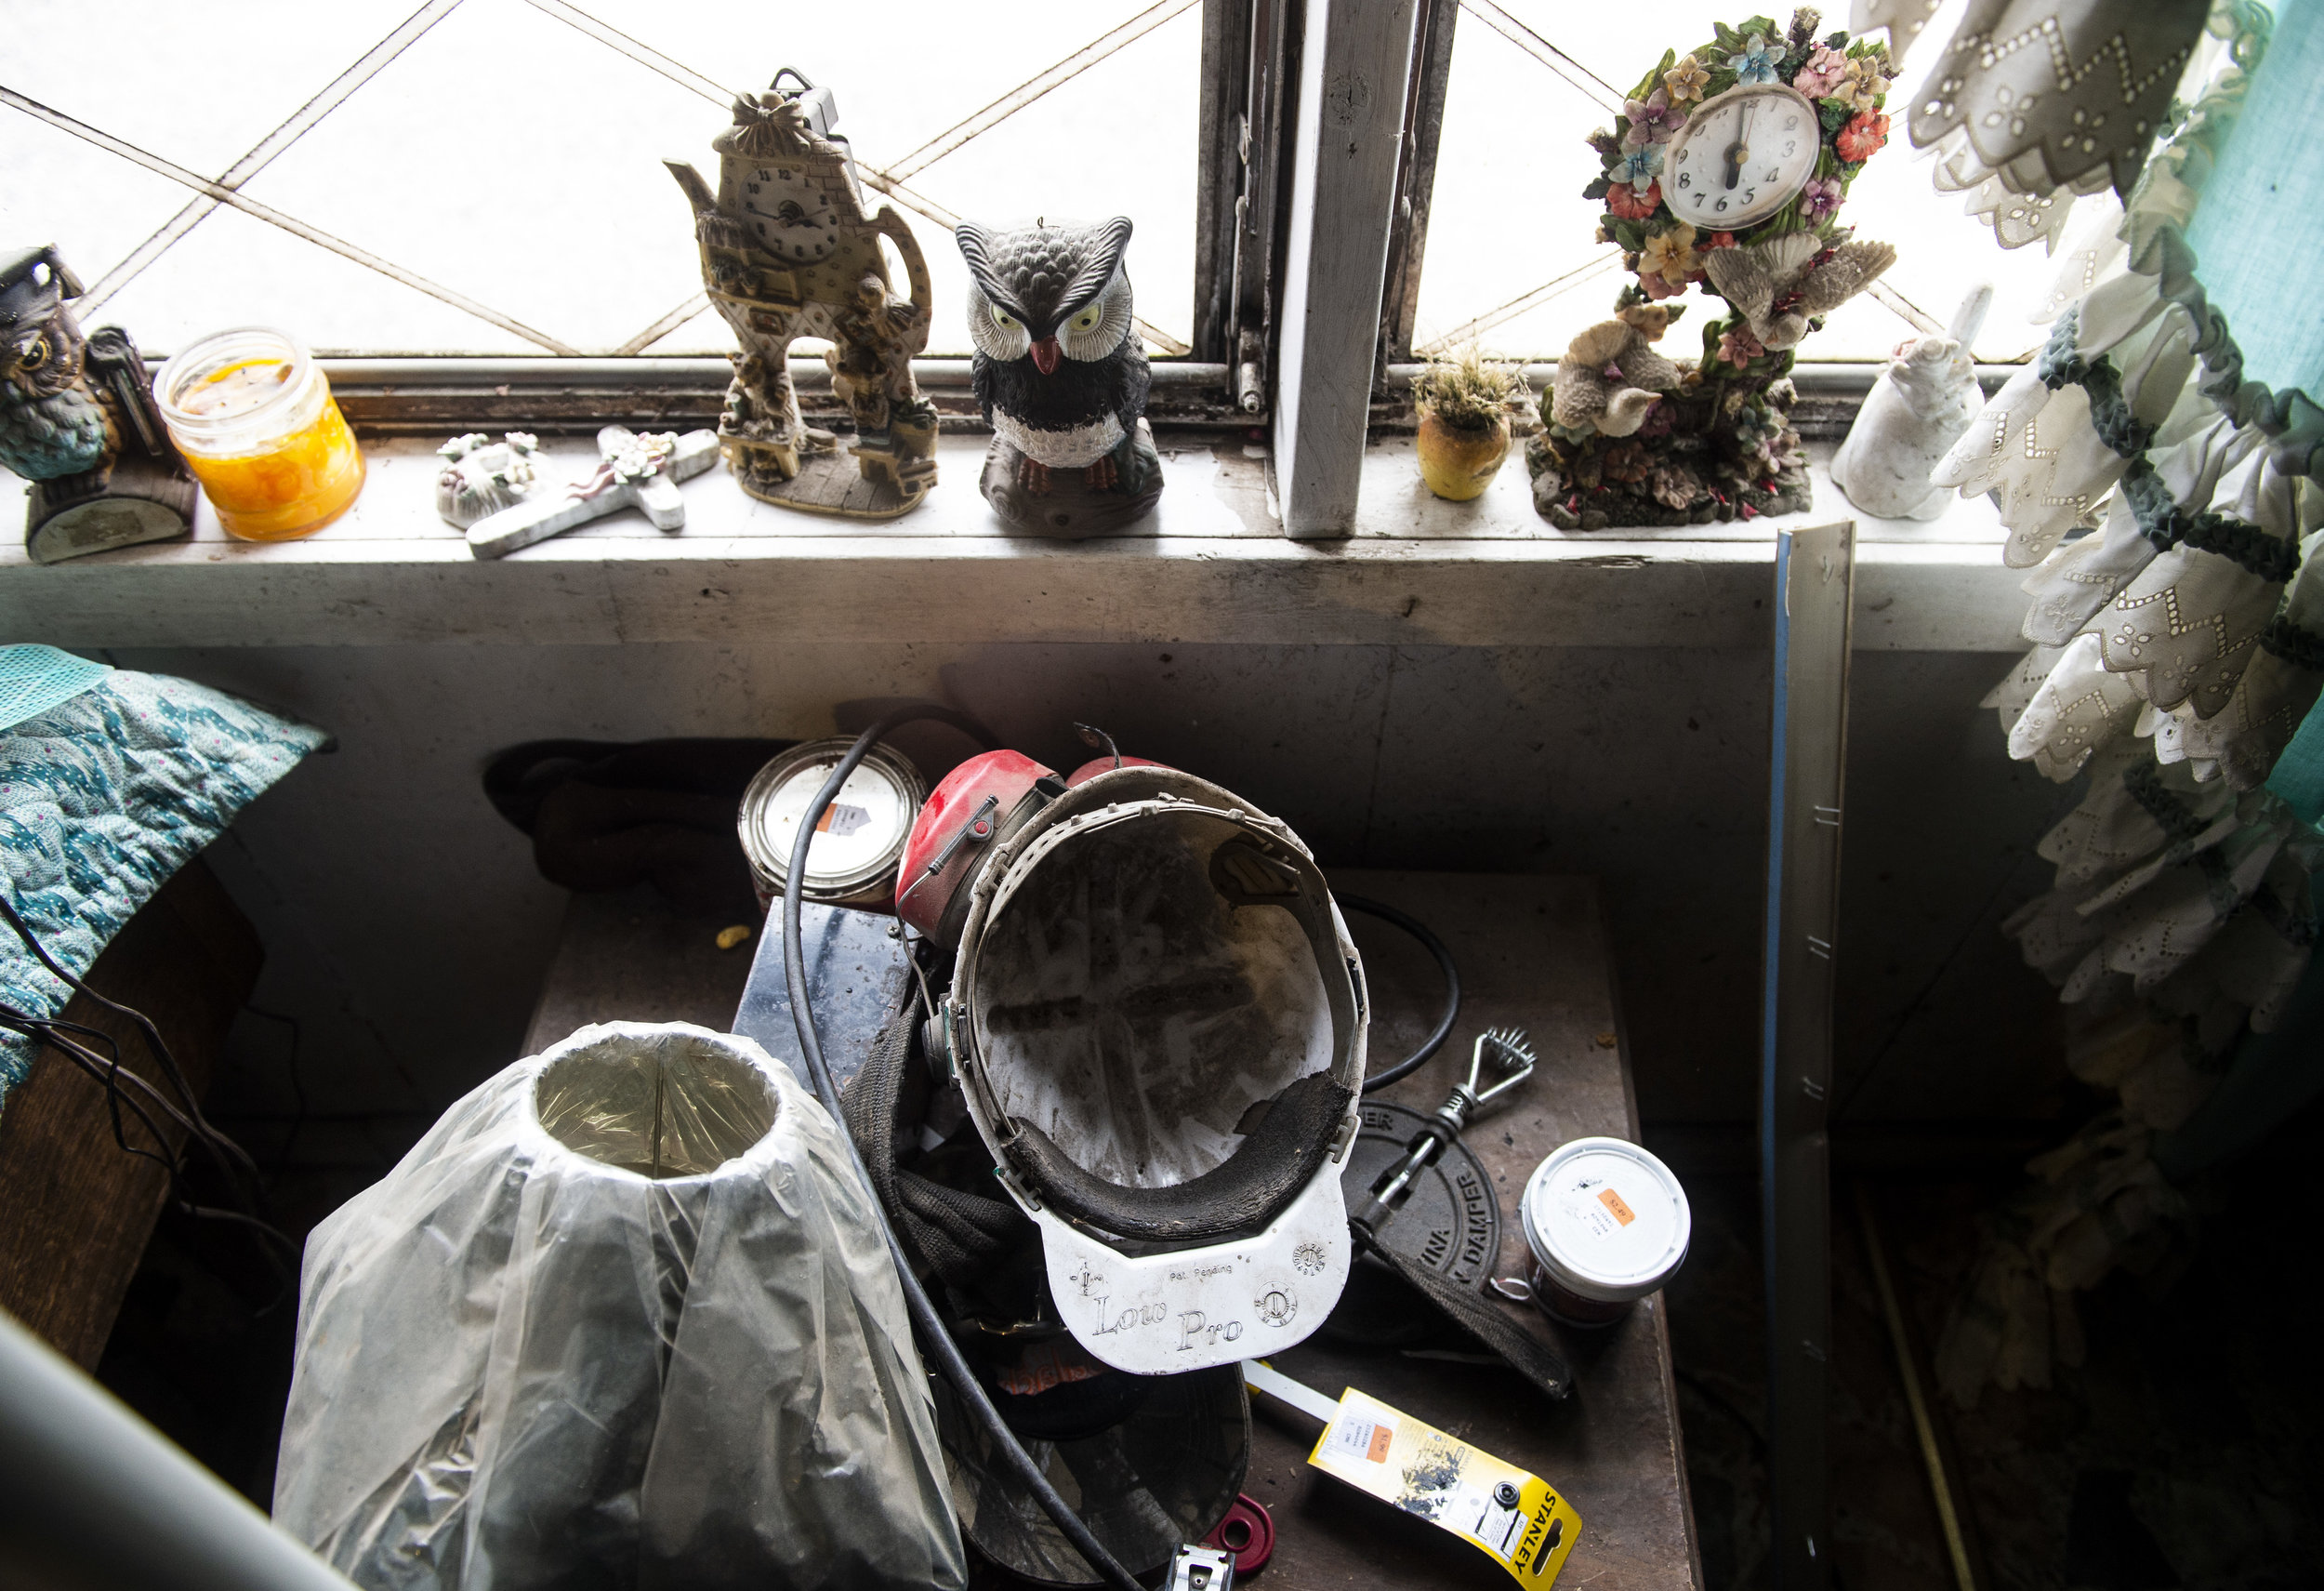  The coal miners helmet that Harold Dotson wore when he worked in the mines sits on a table near the front window of his home in Paw Paw, Kentucky on Thursday, January 17. 